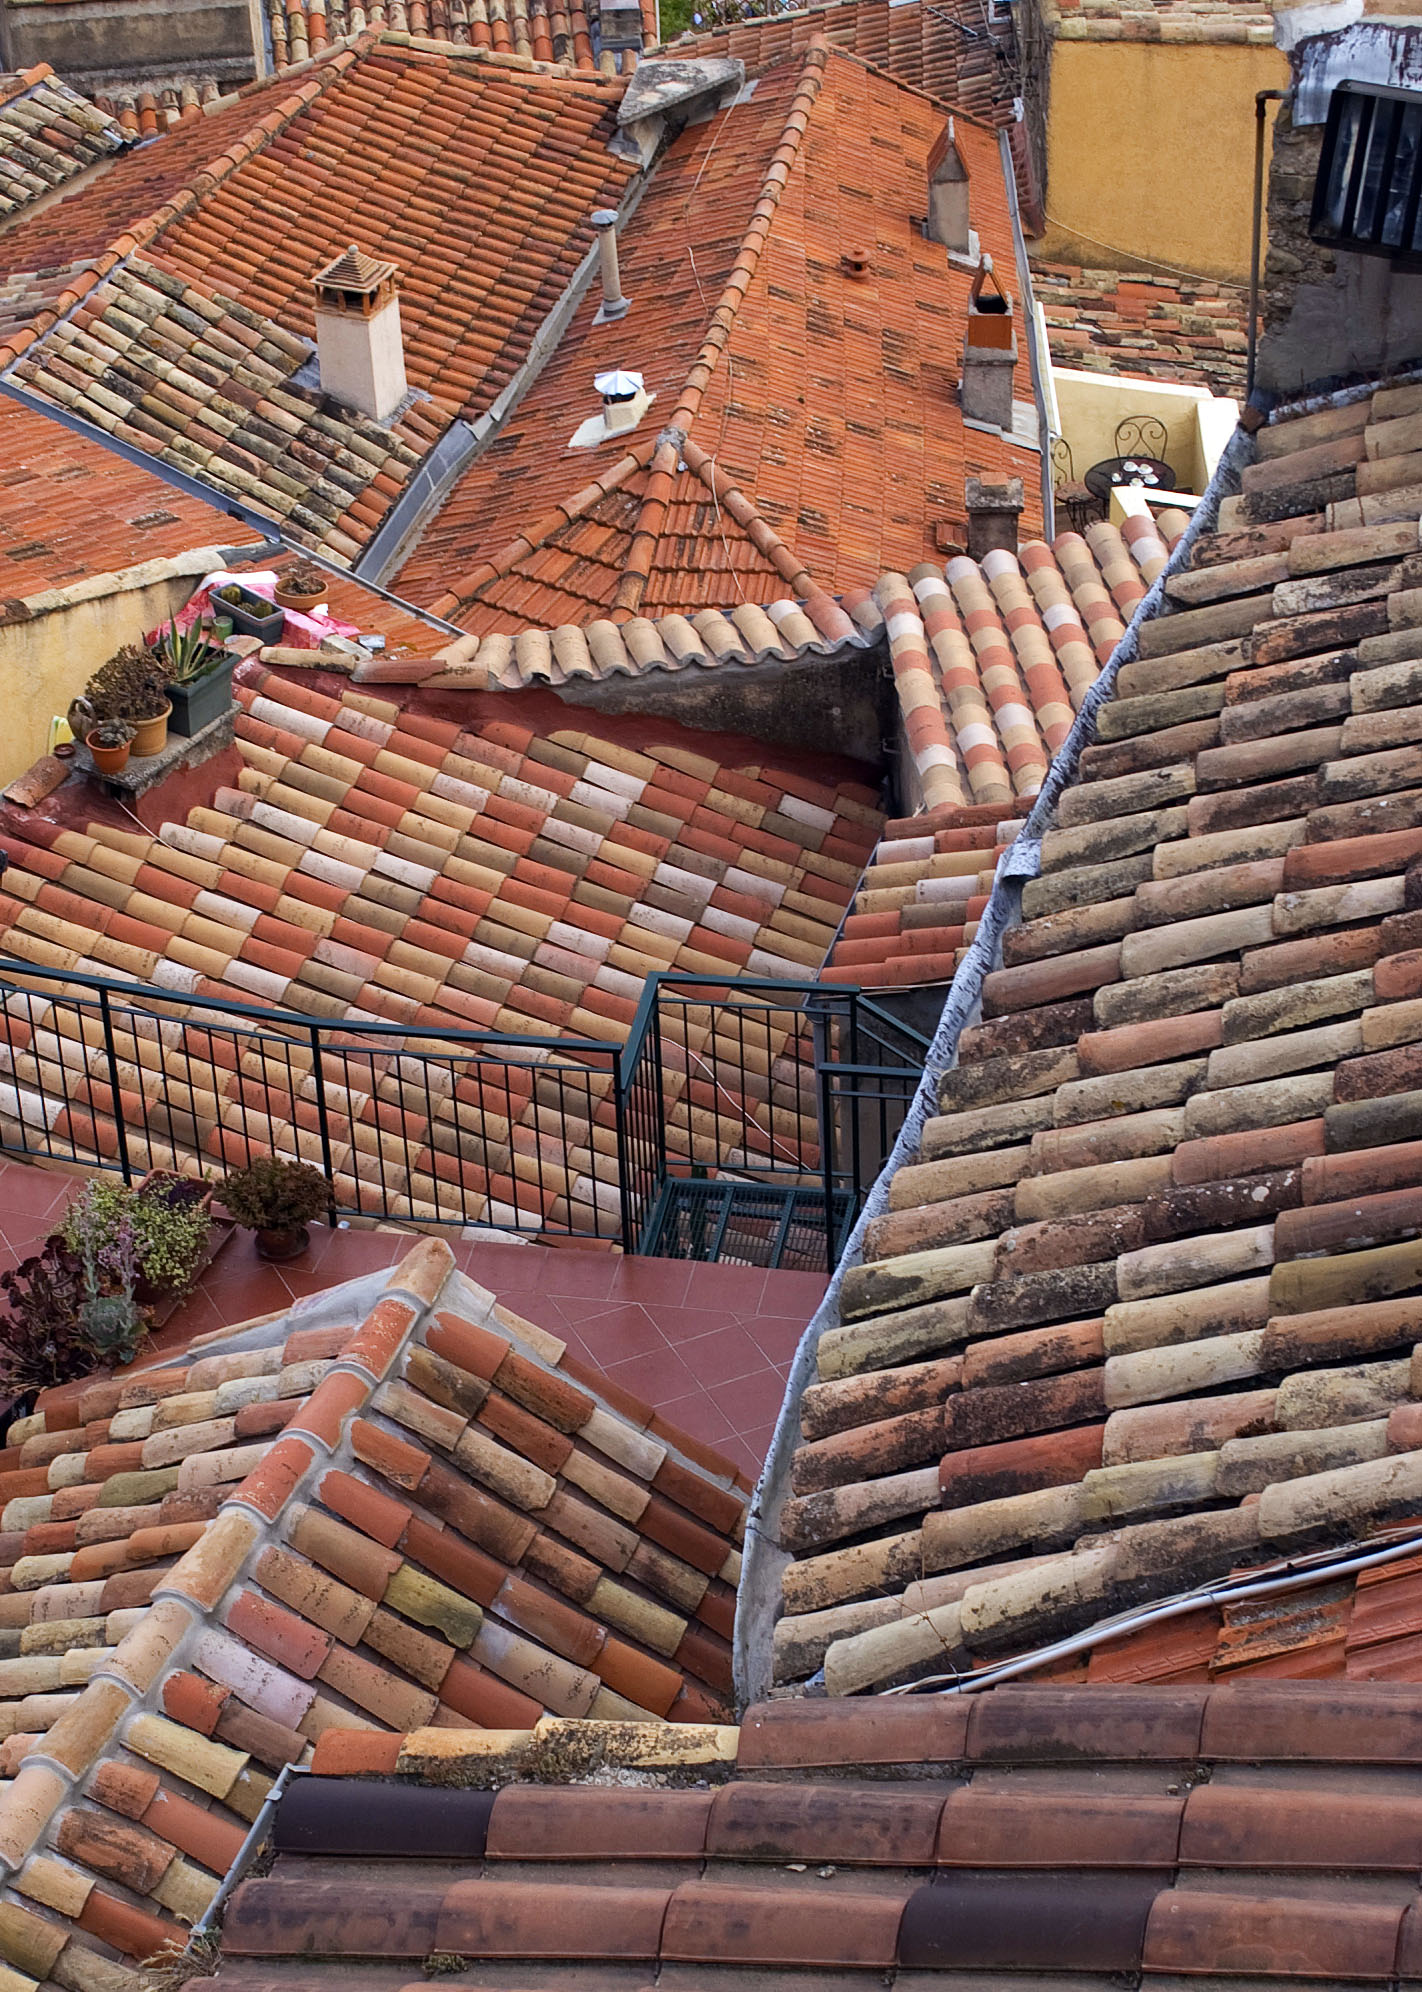 The roofs, perched village of Roquebrune © Javier B - licence [CC BY 3.0] from Wikimedia Commons